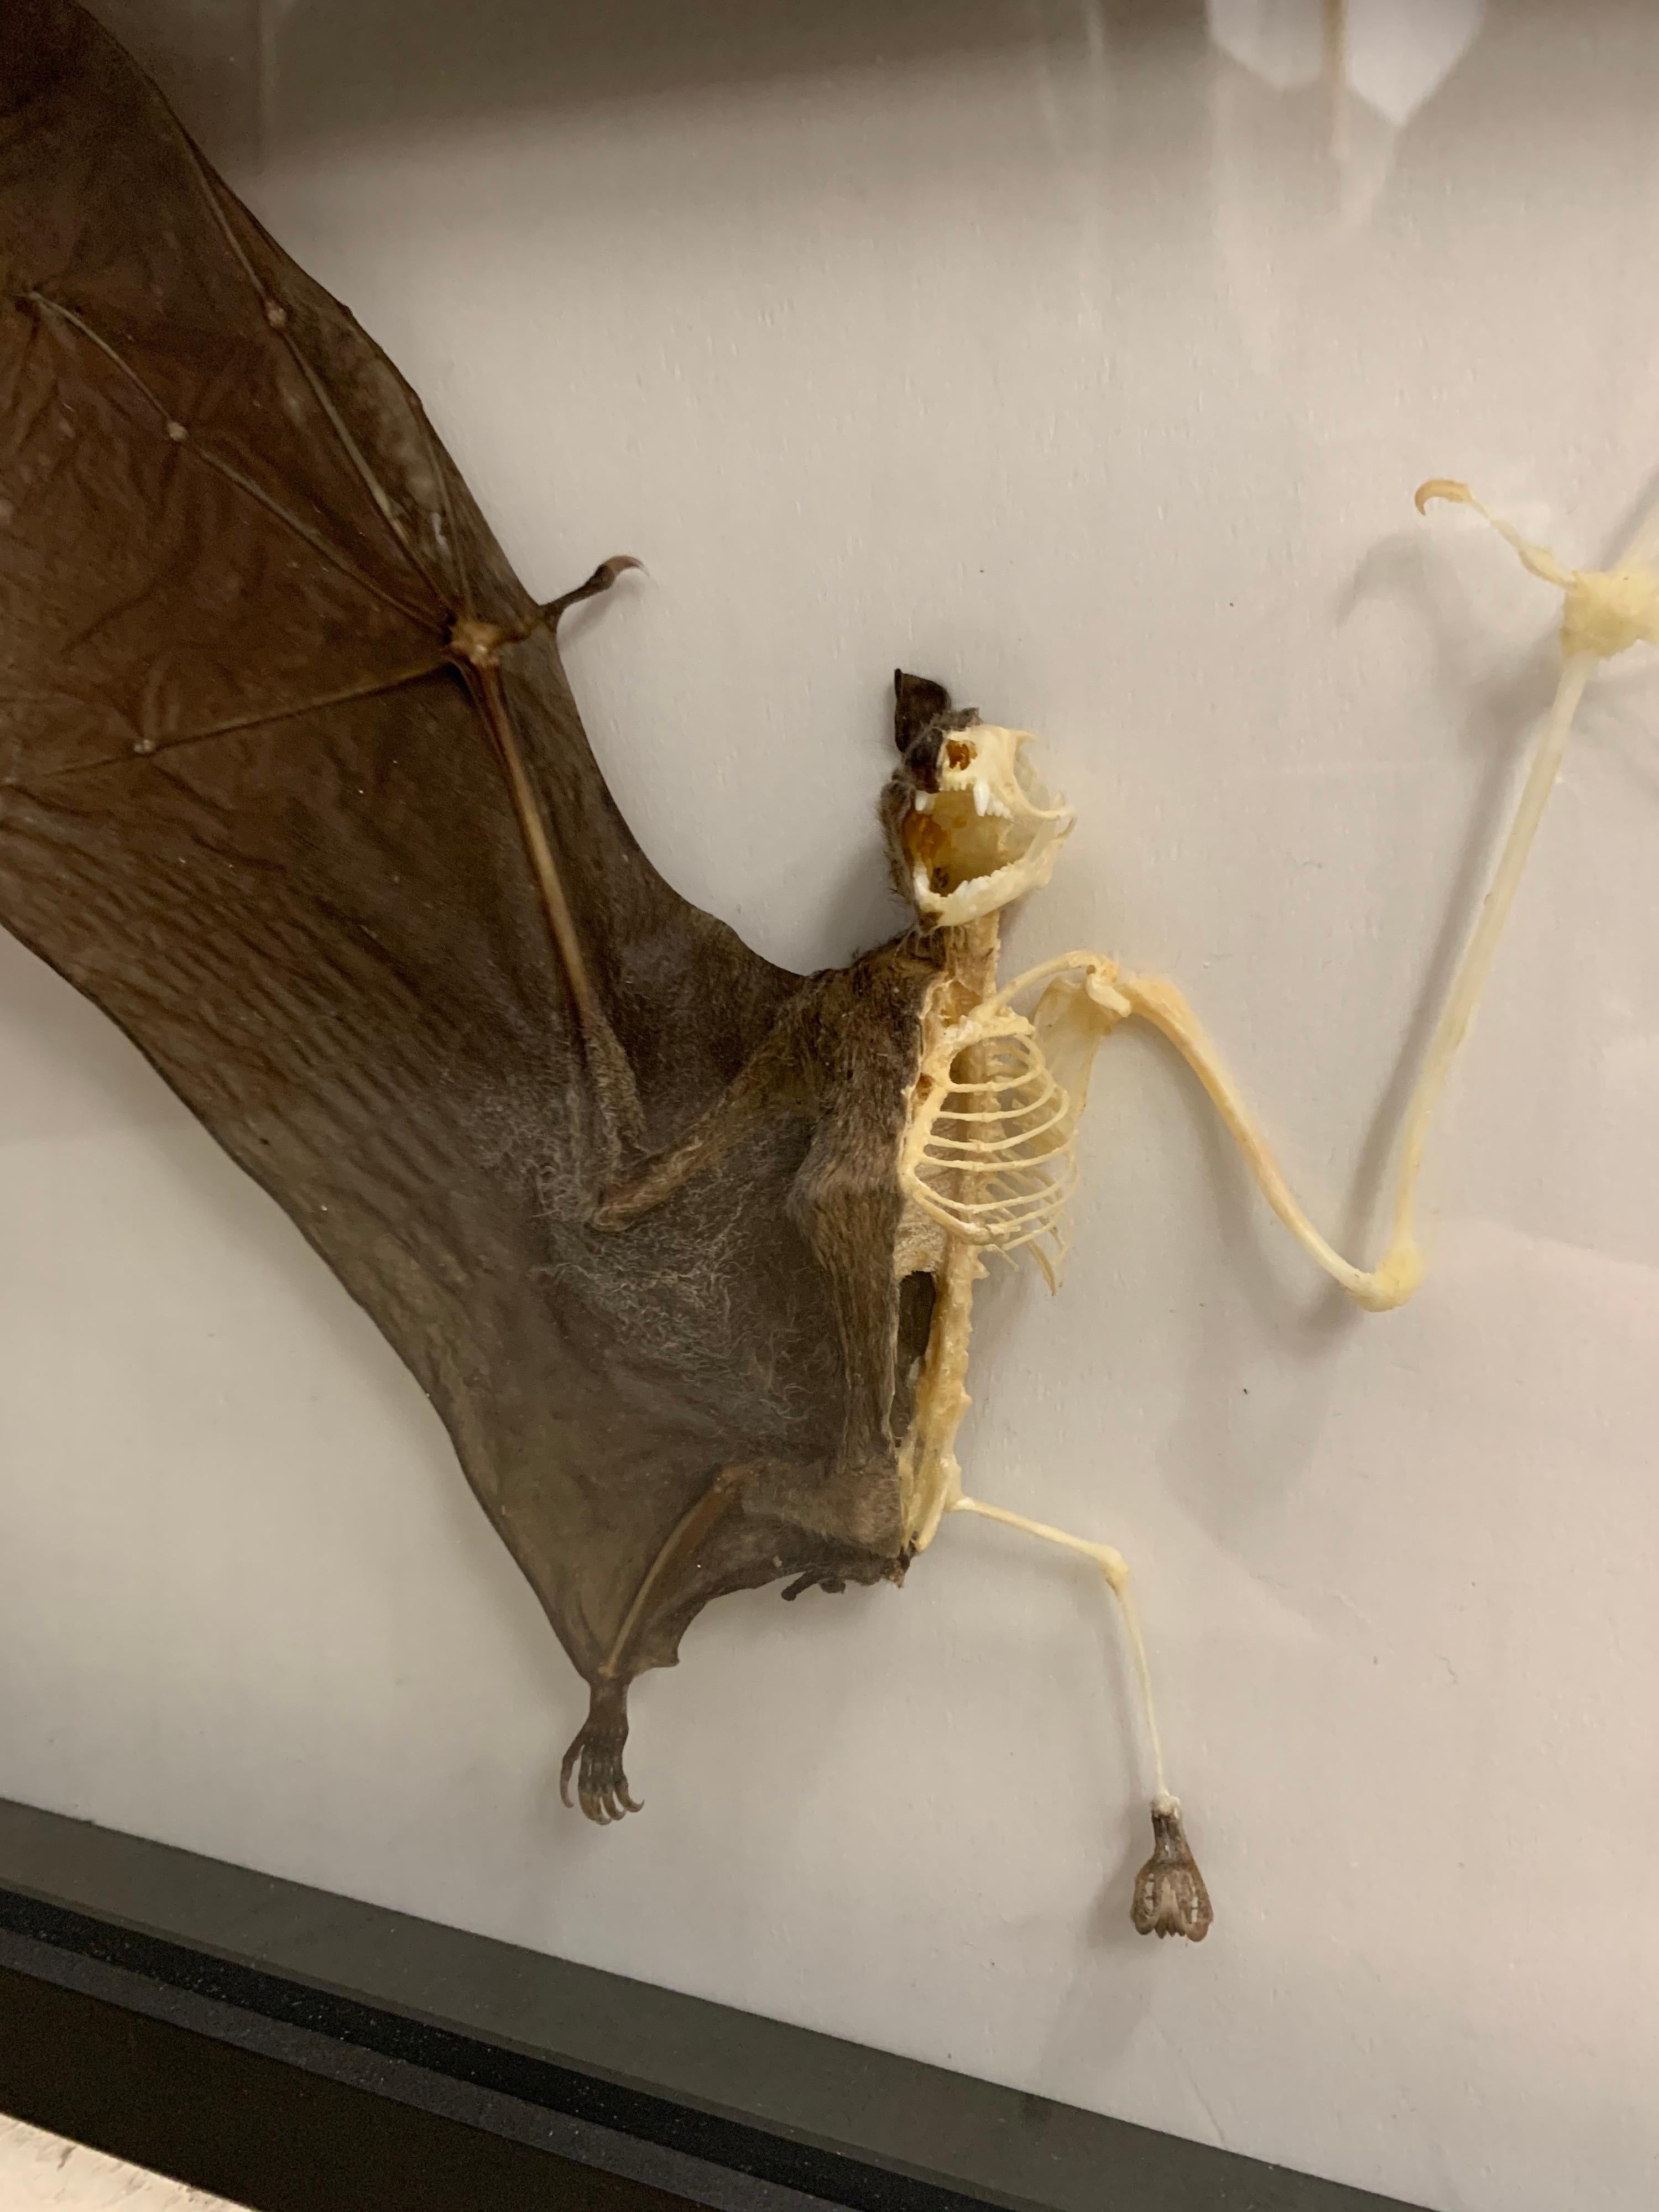 Beautifull Asian fruit bat in a nice wooden display with glass. Skillfully made in half skeleton, half normal condition so you can study the bat from inside and outside! Stunning details like the wings and the teeth of the bat. Non-Cites